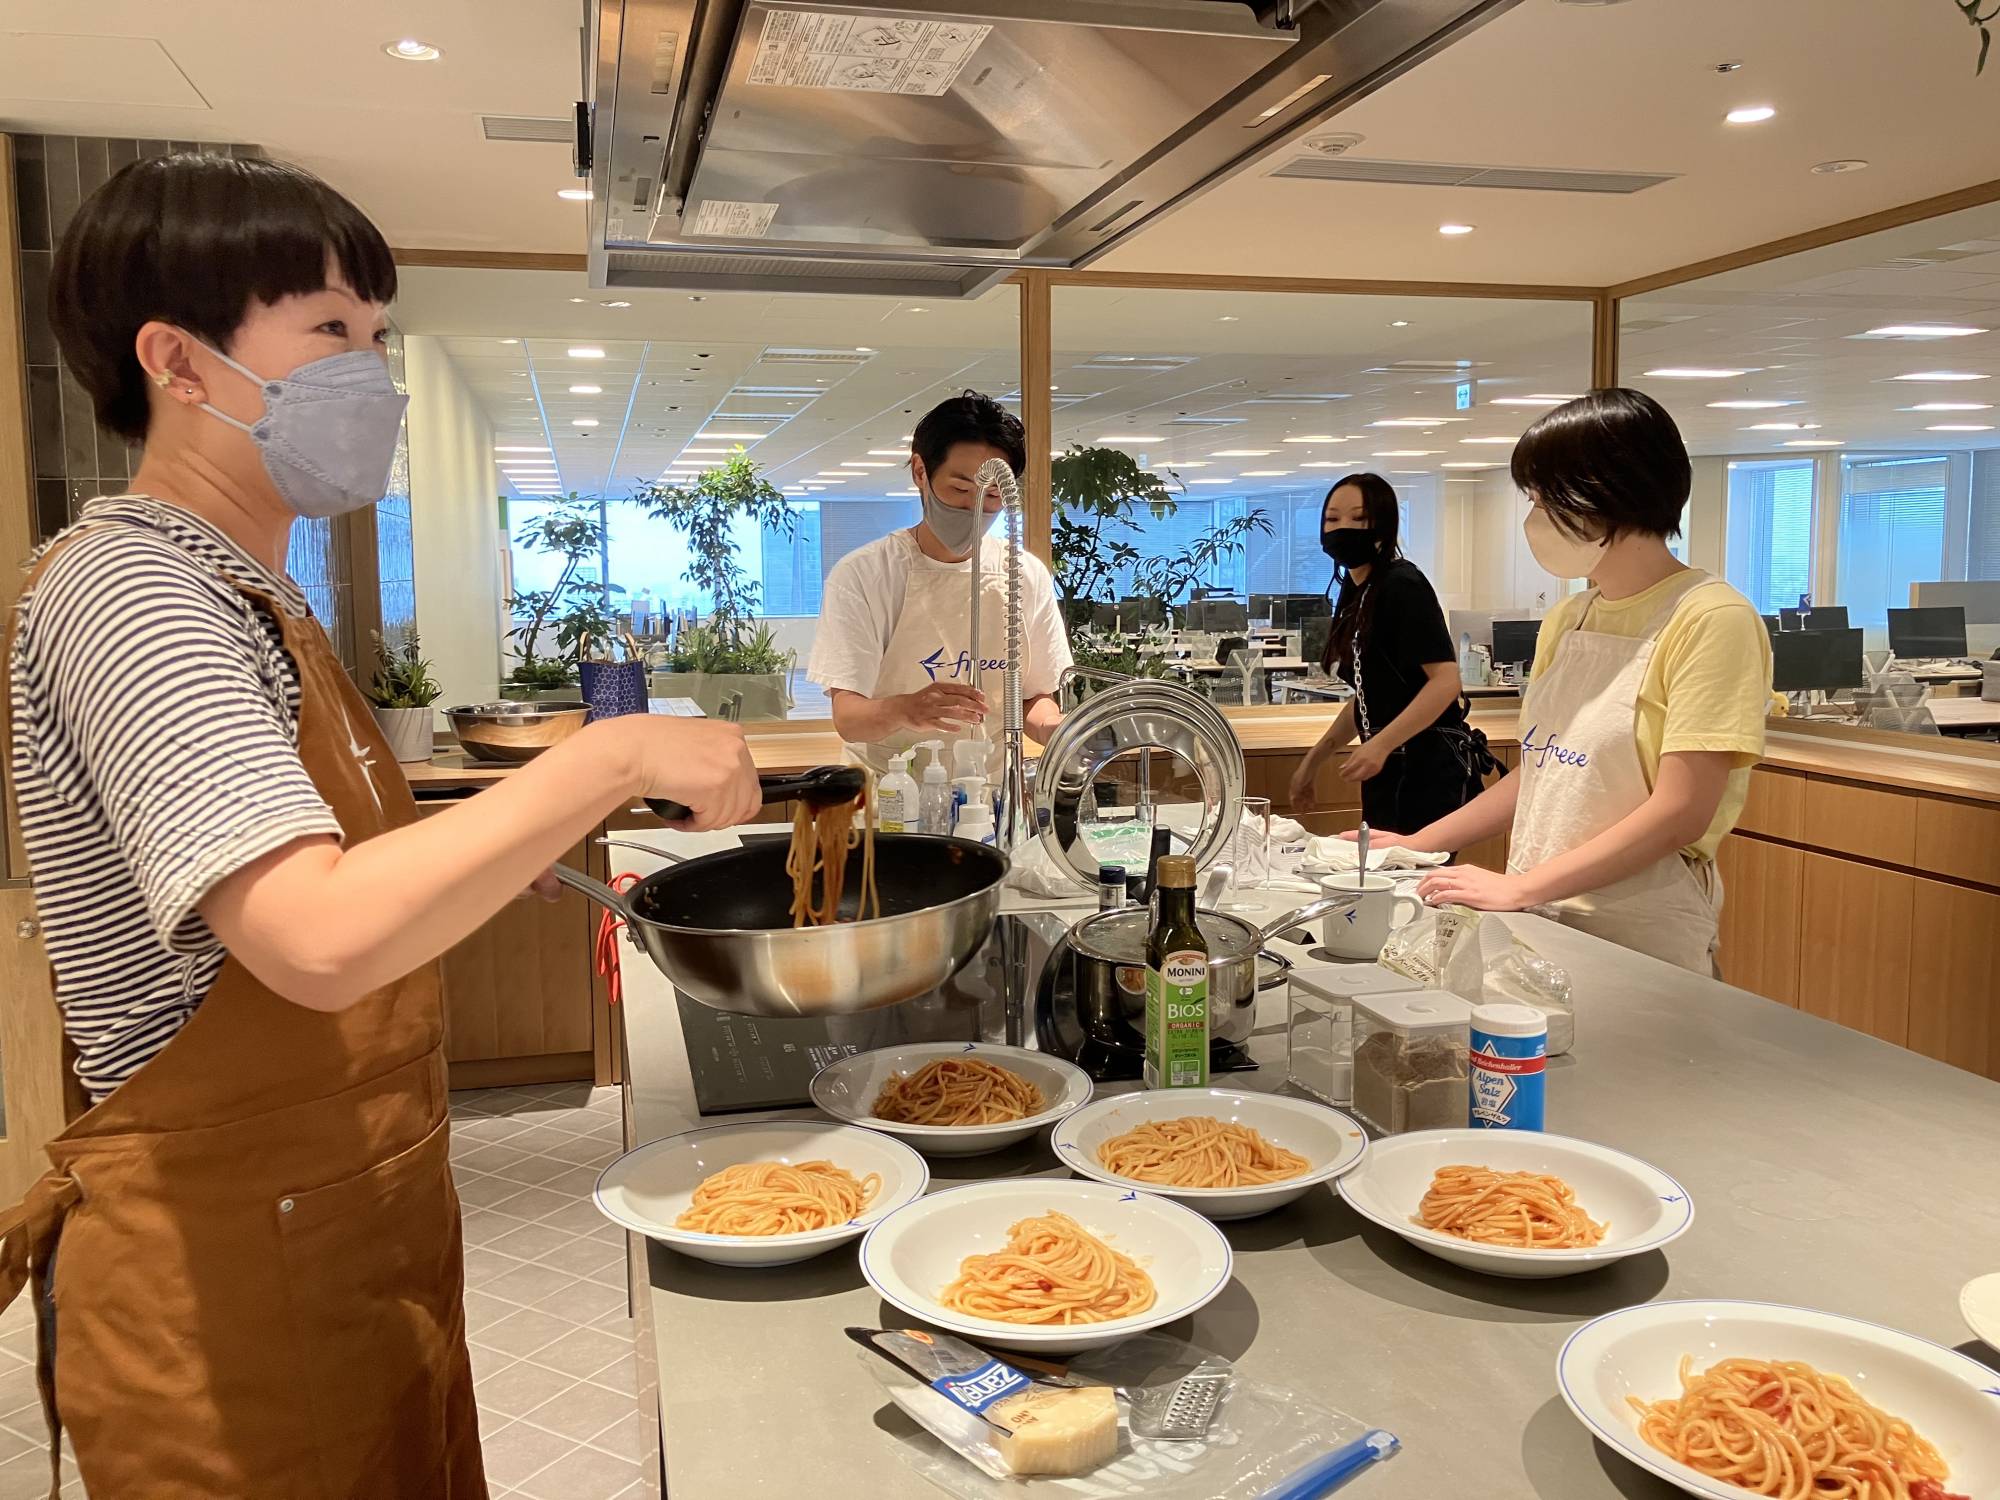 Employees at Tokyo-based tech firm Freee gather in a kitchen and cook together at its new office in September. | KAZUAKI NAGATA